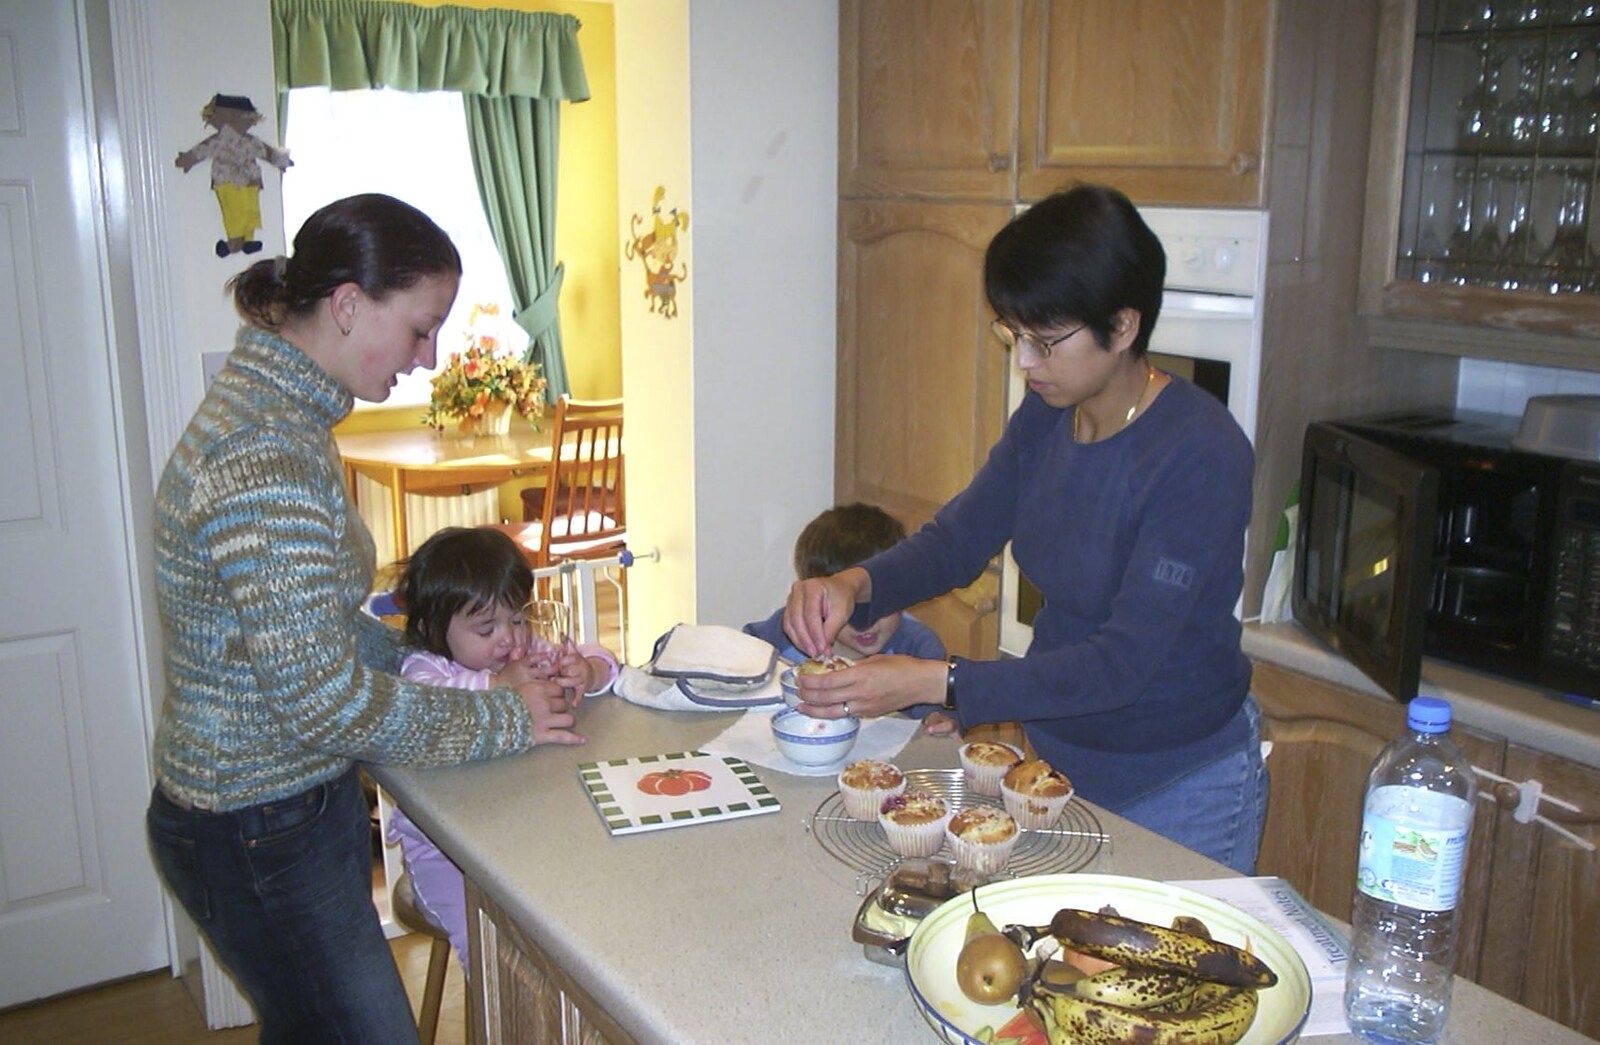 A New Forest Weekender, Hordle, Hampshire - 19th October 2003: Jane and the au pair do some baking